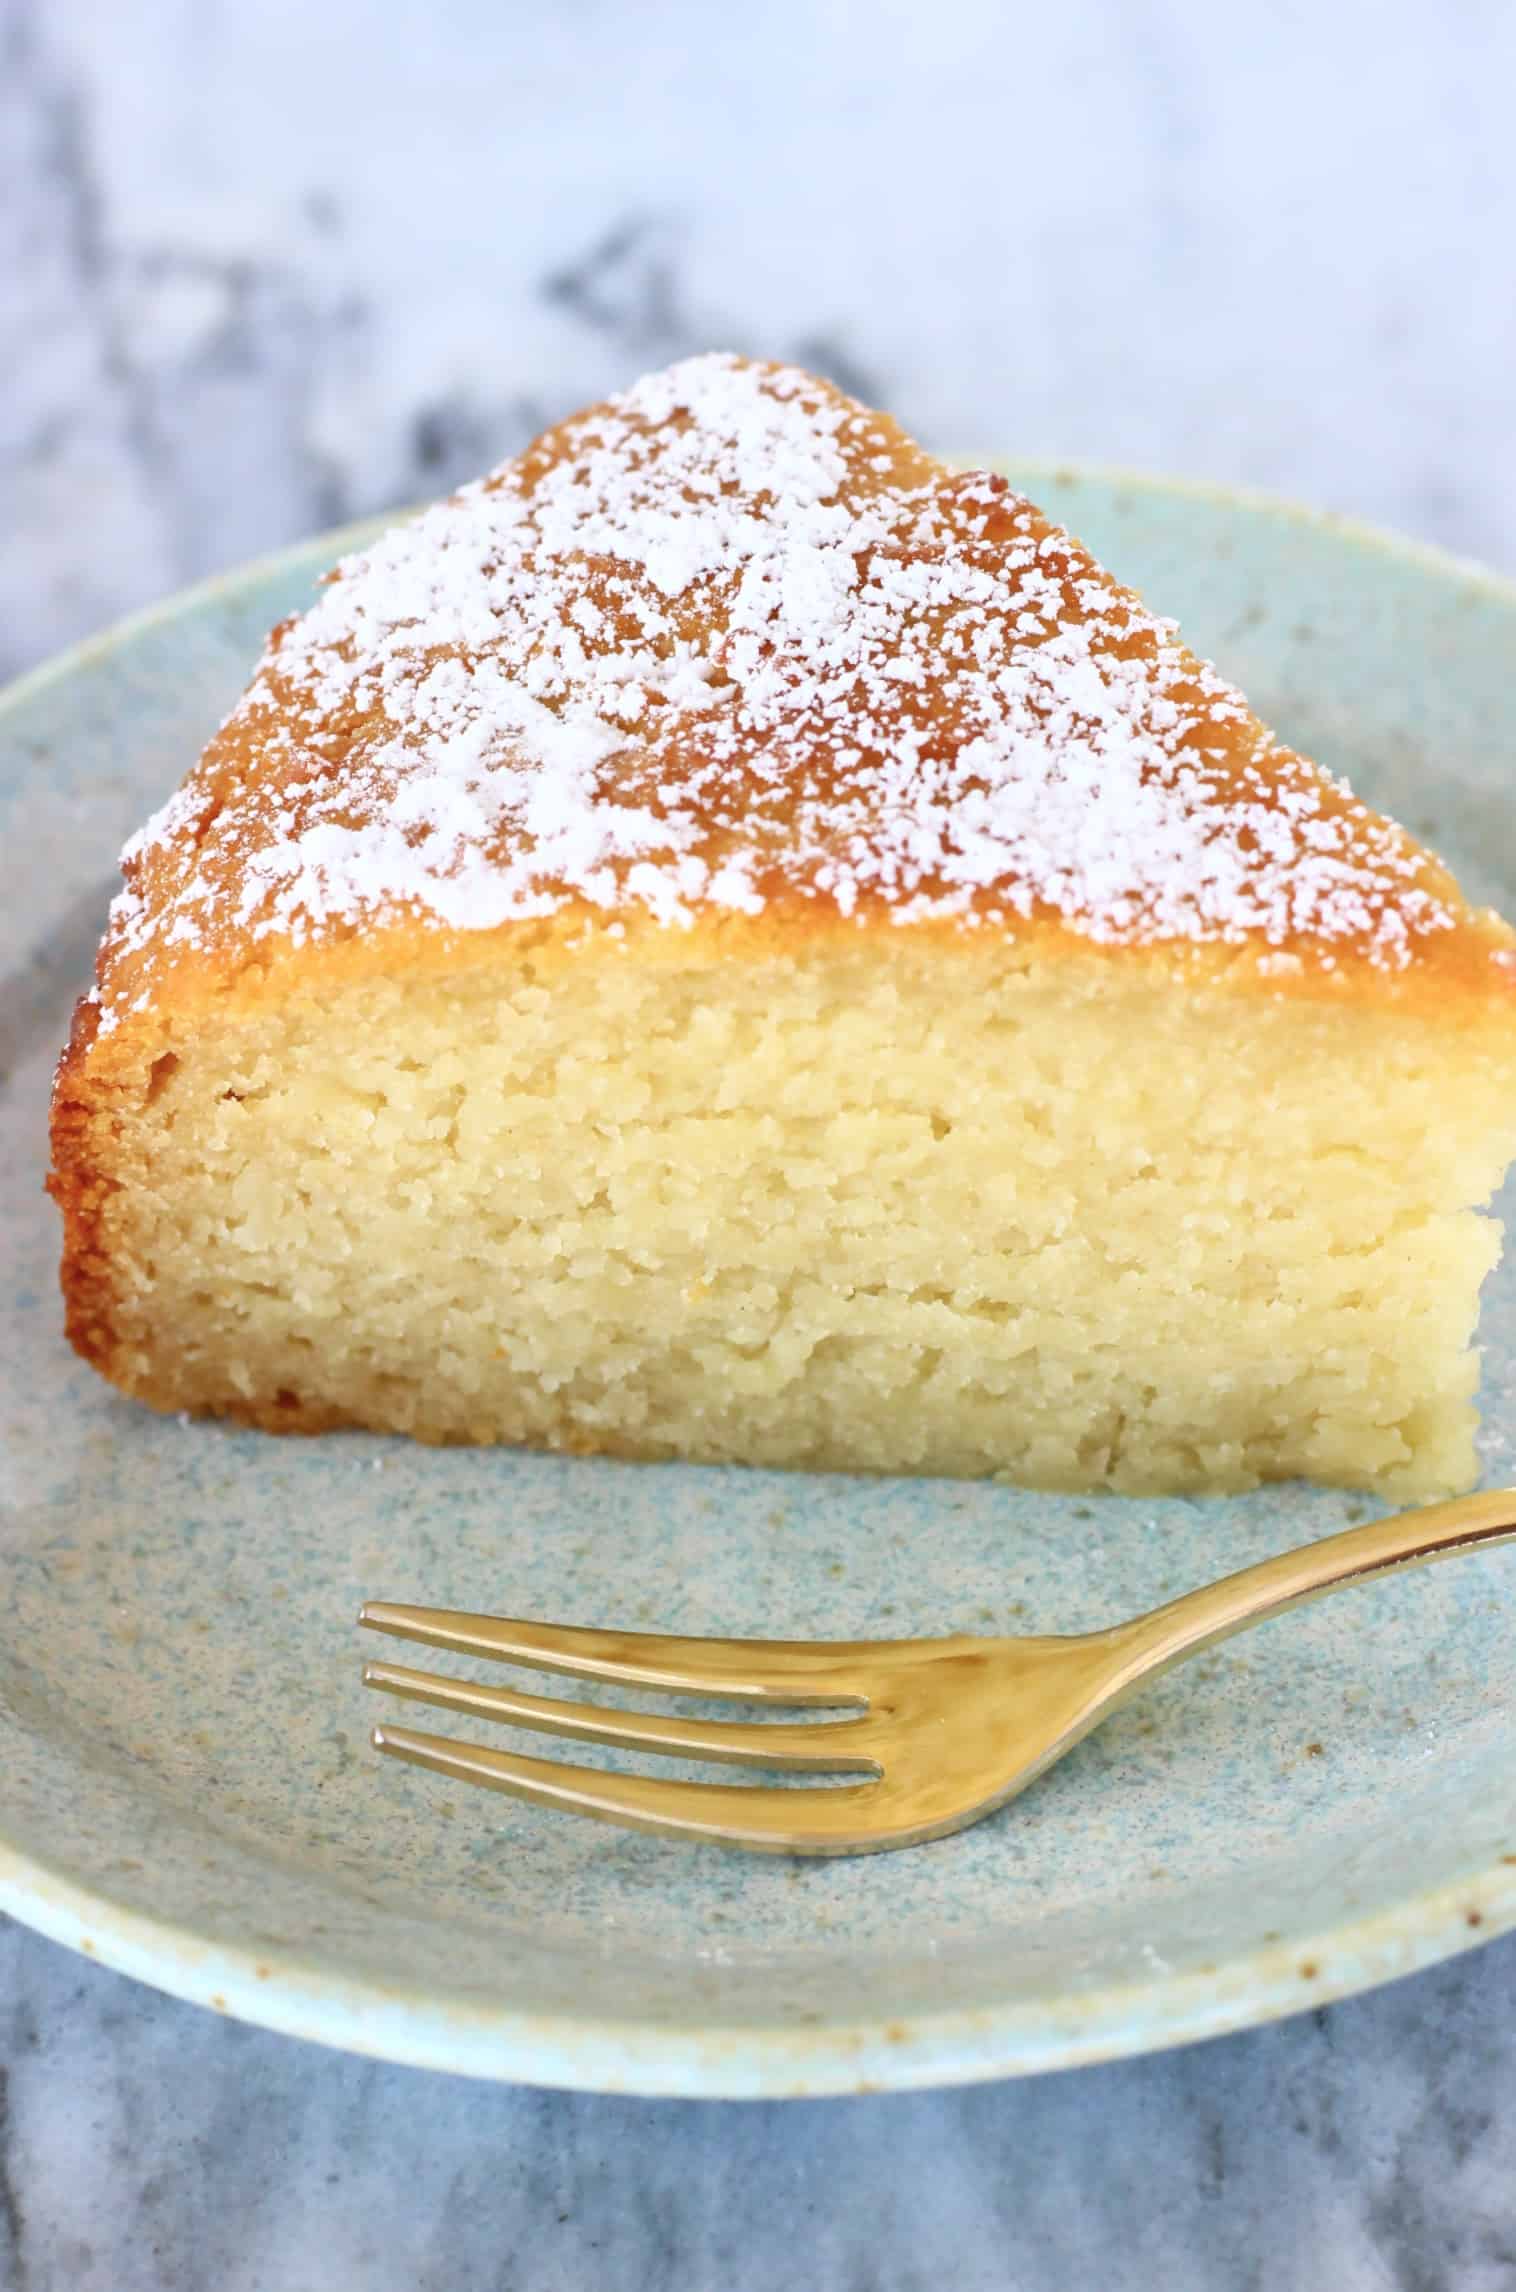 A slice of gluten-free vegan yogurt cake on a plate with a fork